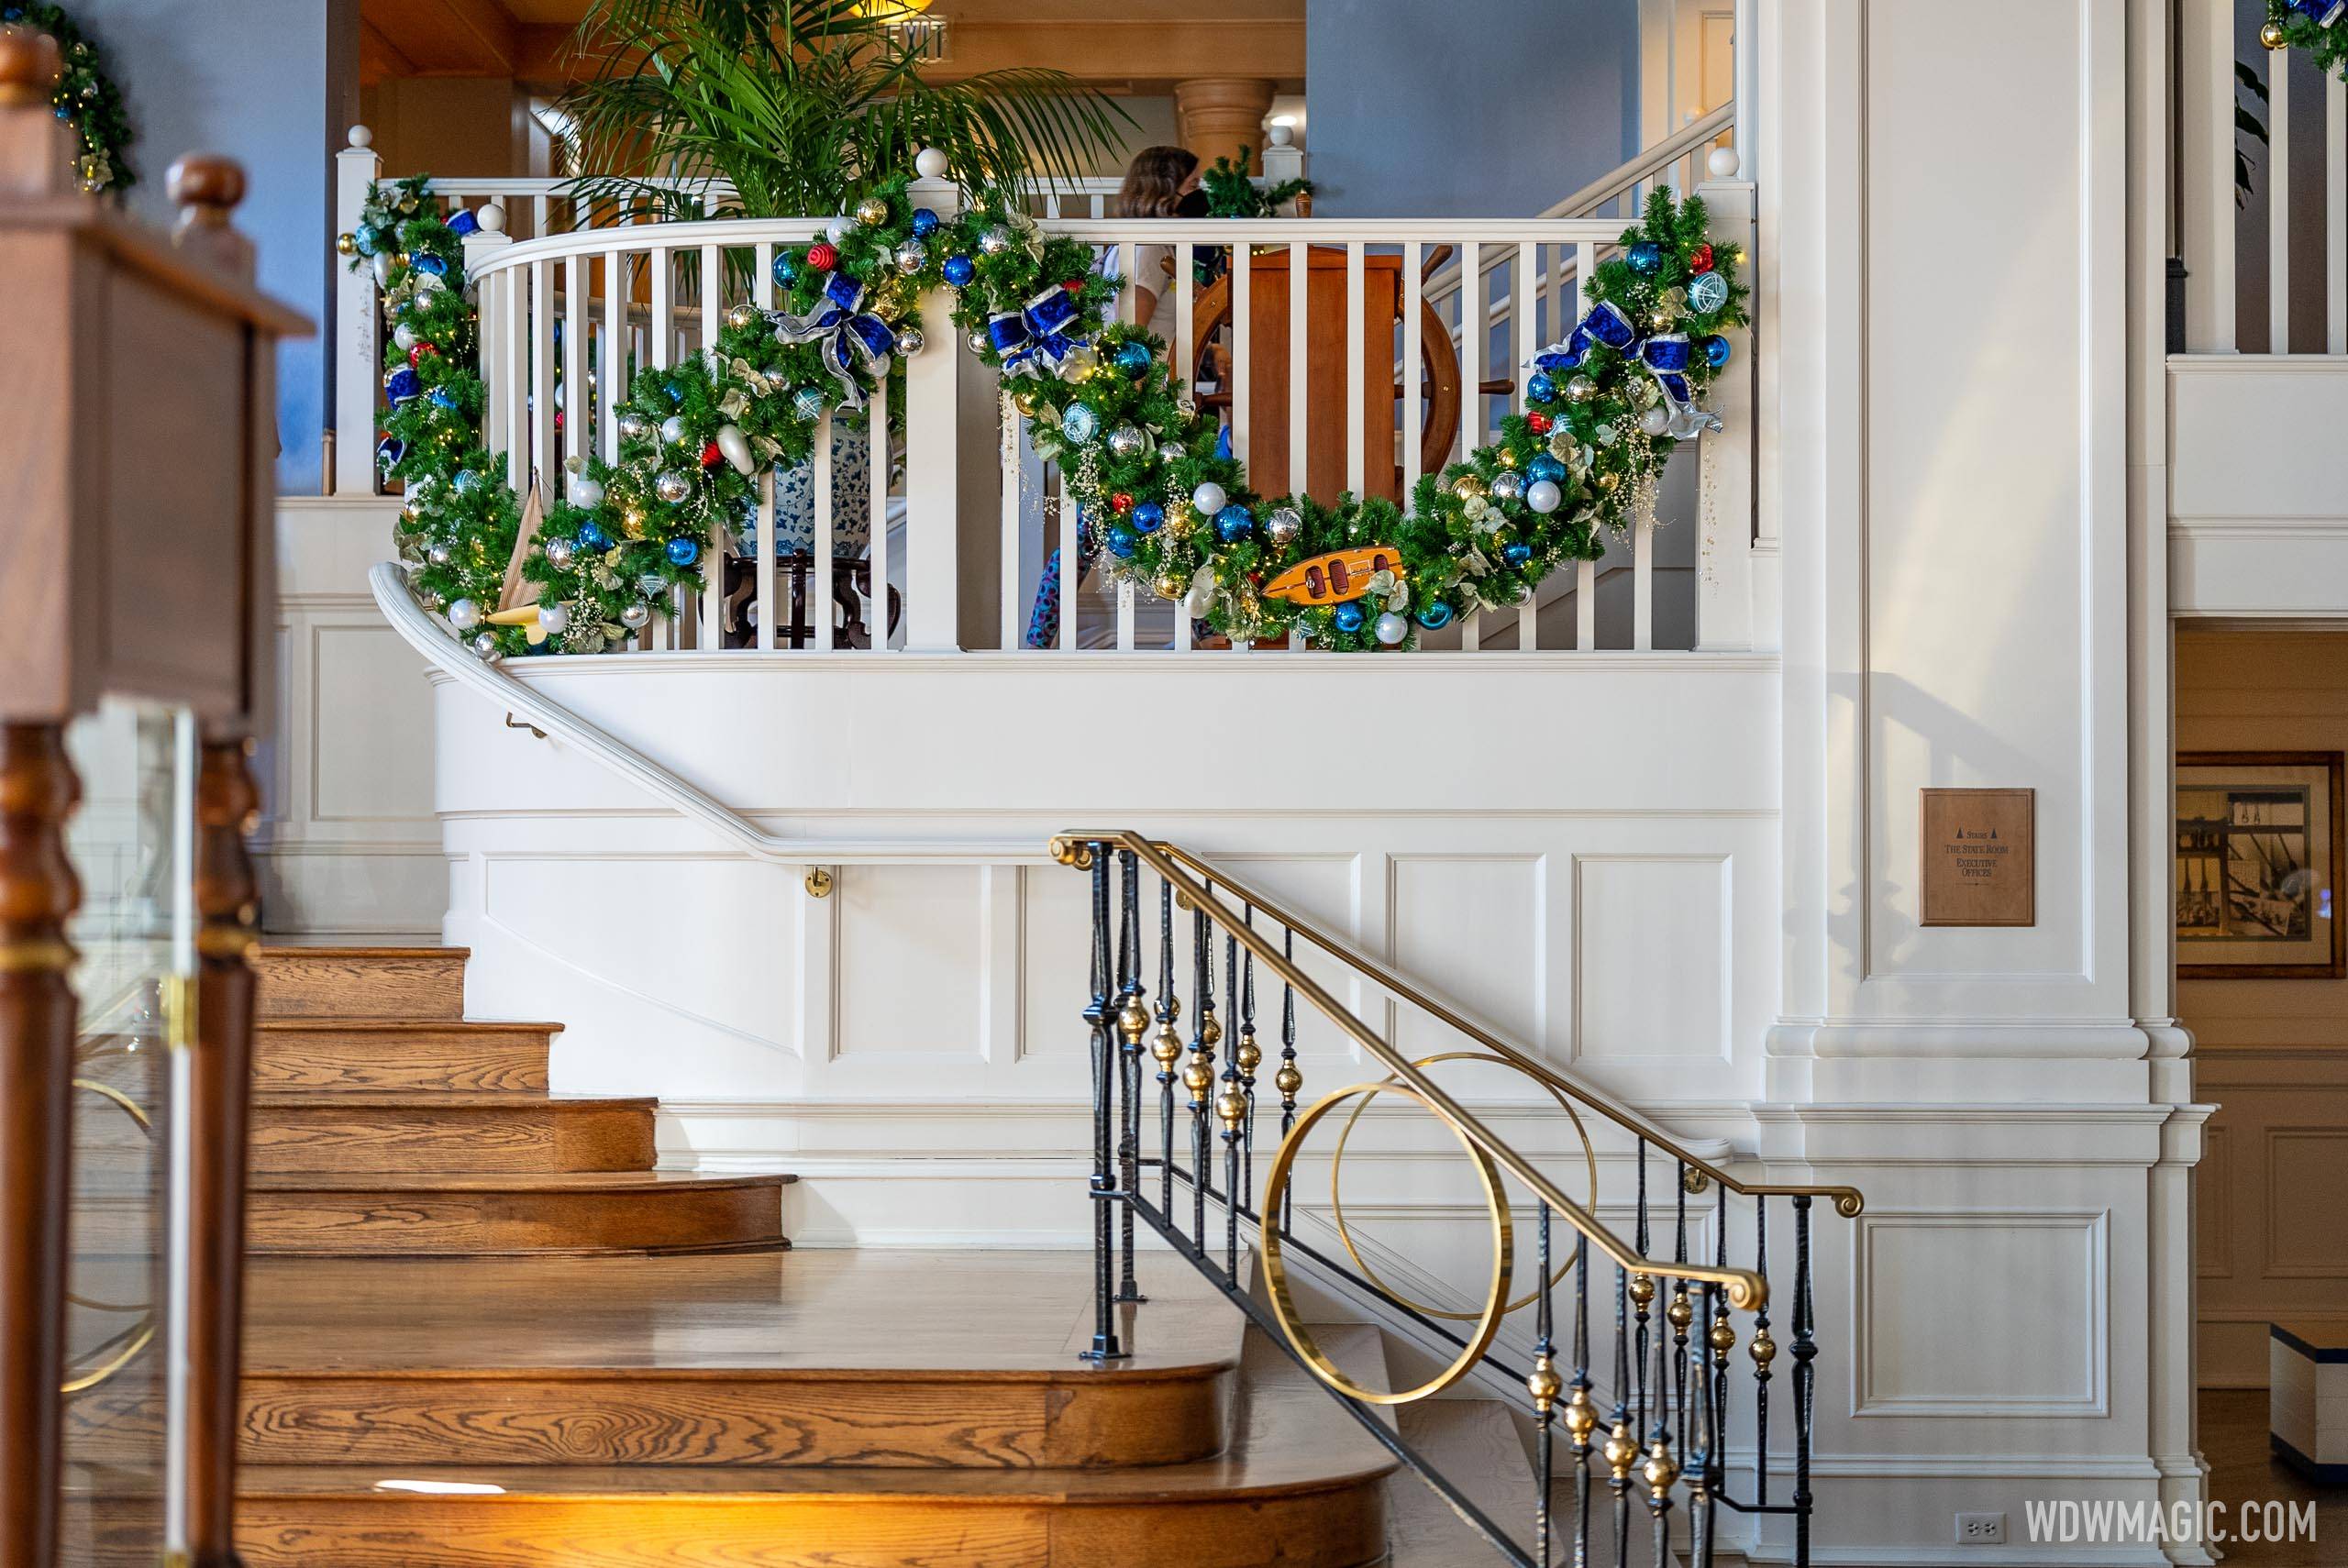 Yacht Club staircase dressed for the holiday